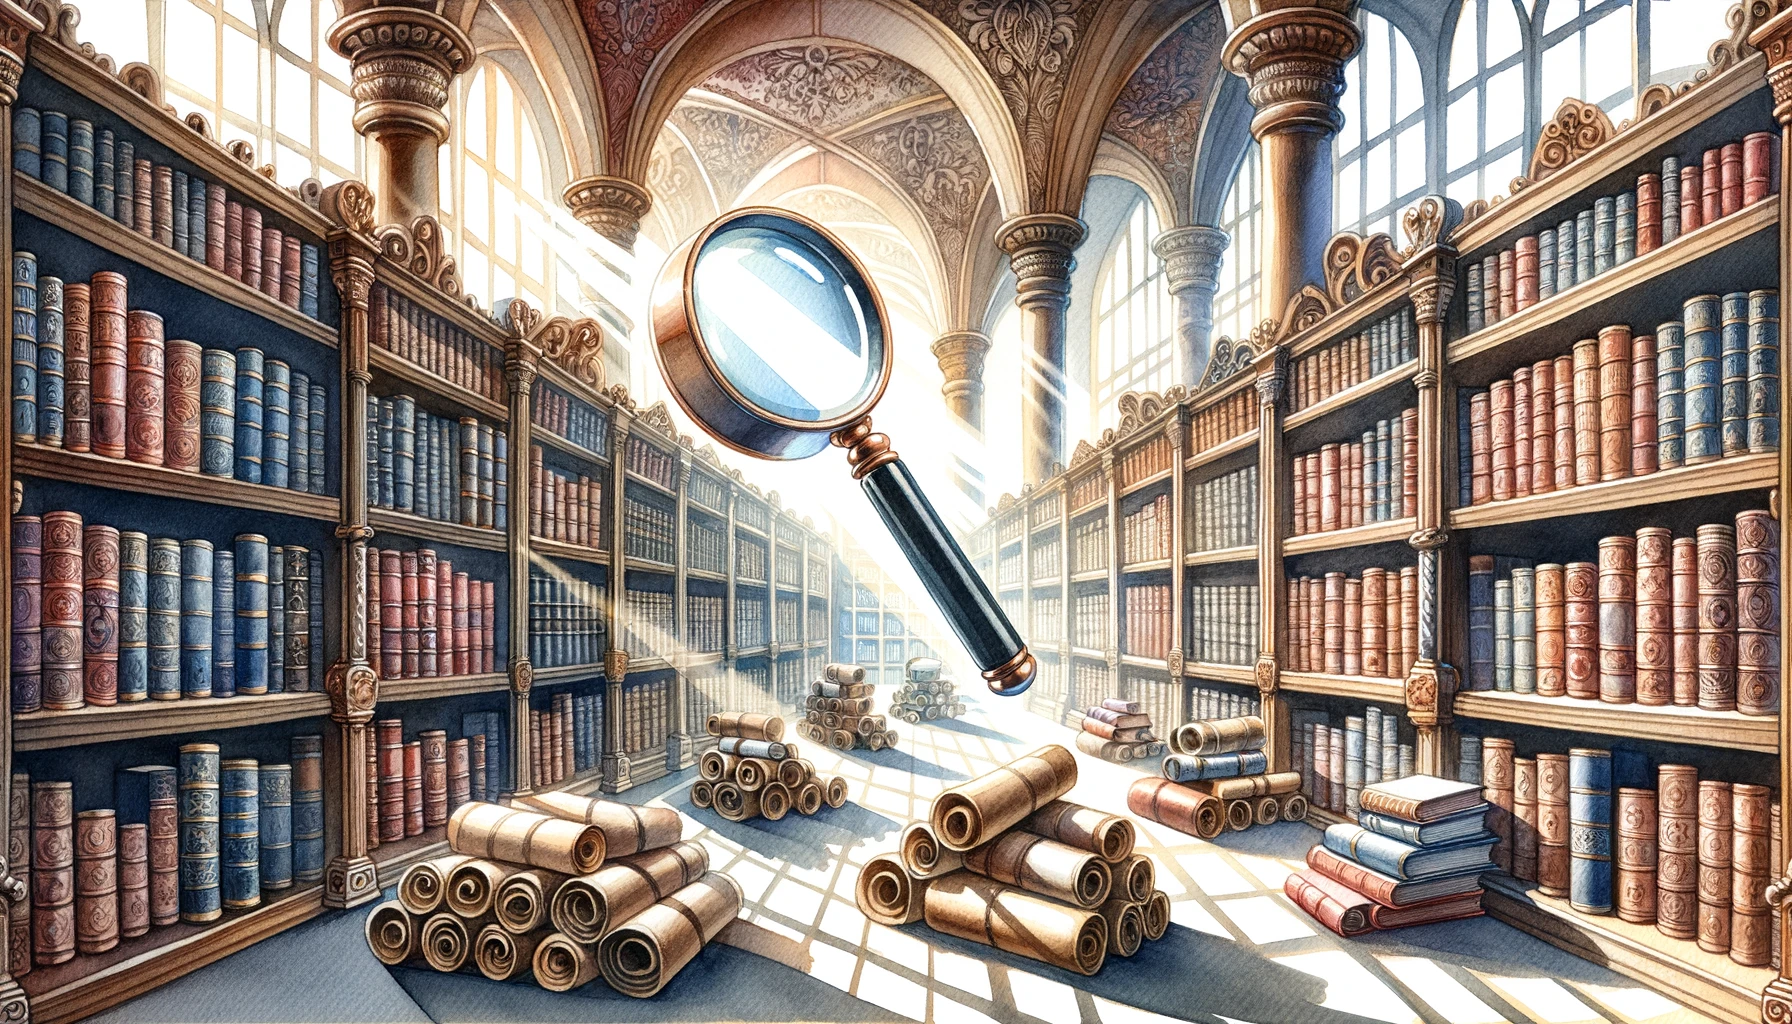 Scrolls and books fill an ornate library, symbolizing articles. A hovering magnifying glass highlights search, with soft light through arched windows.